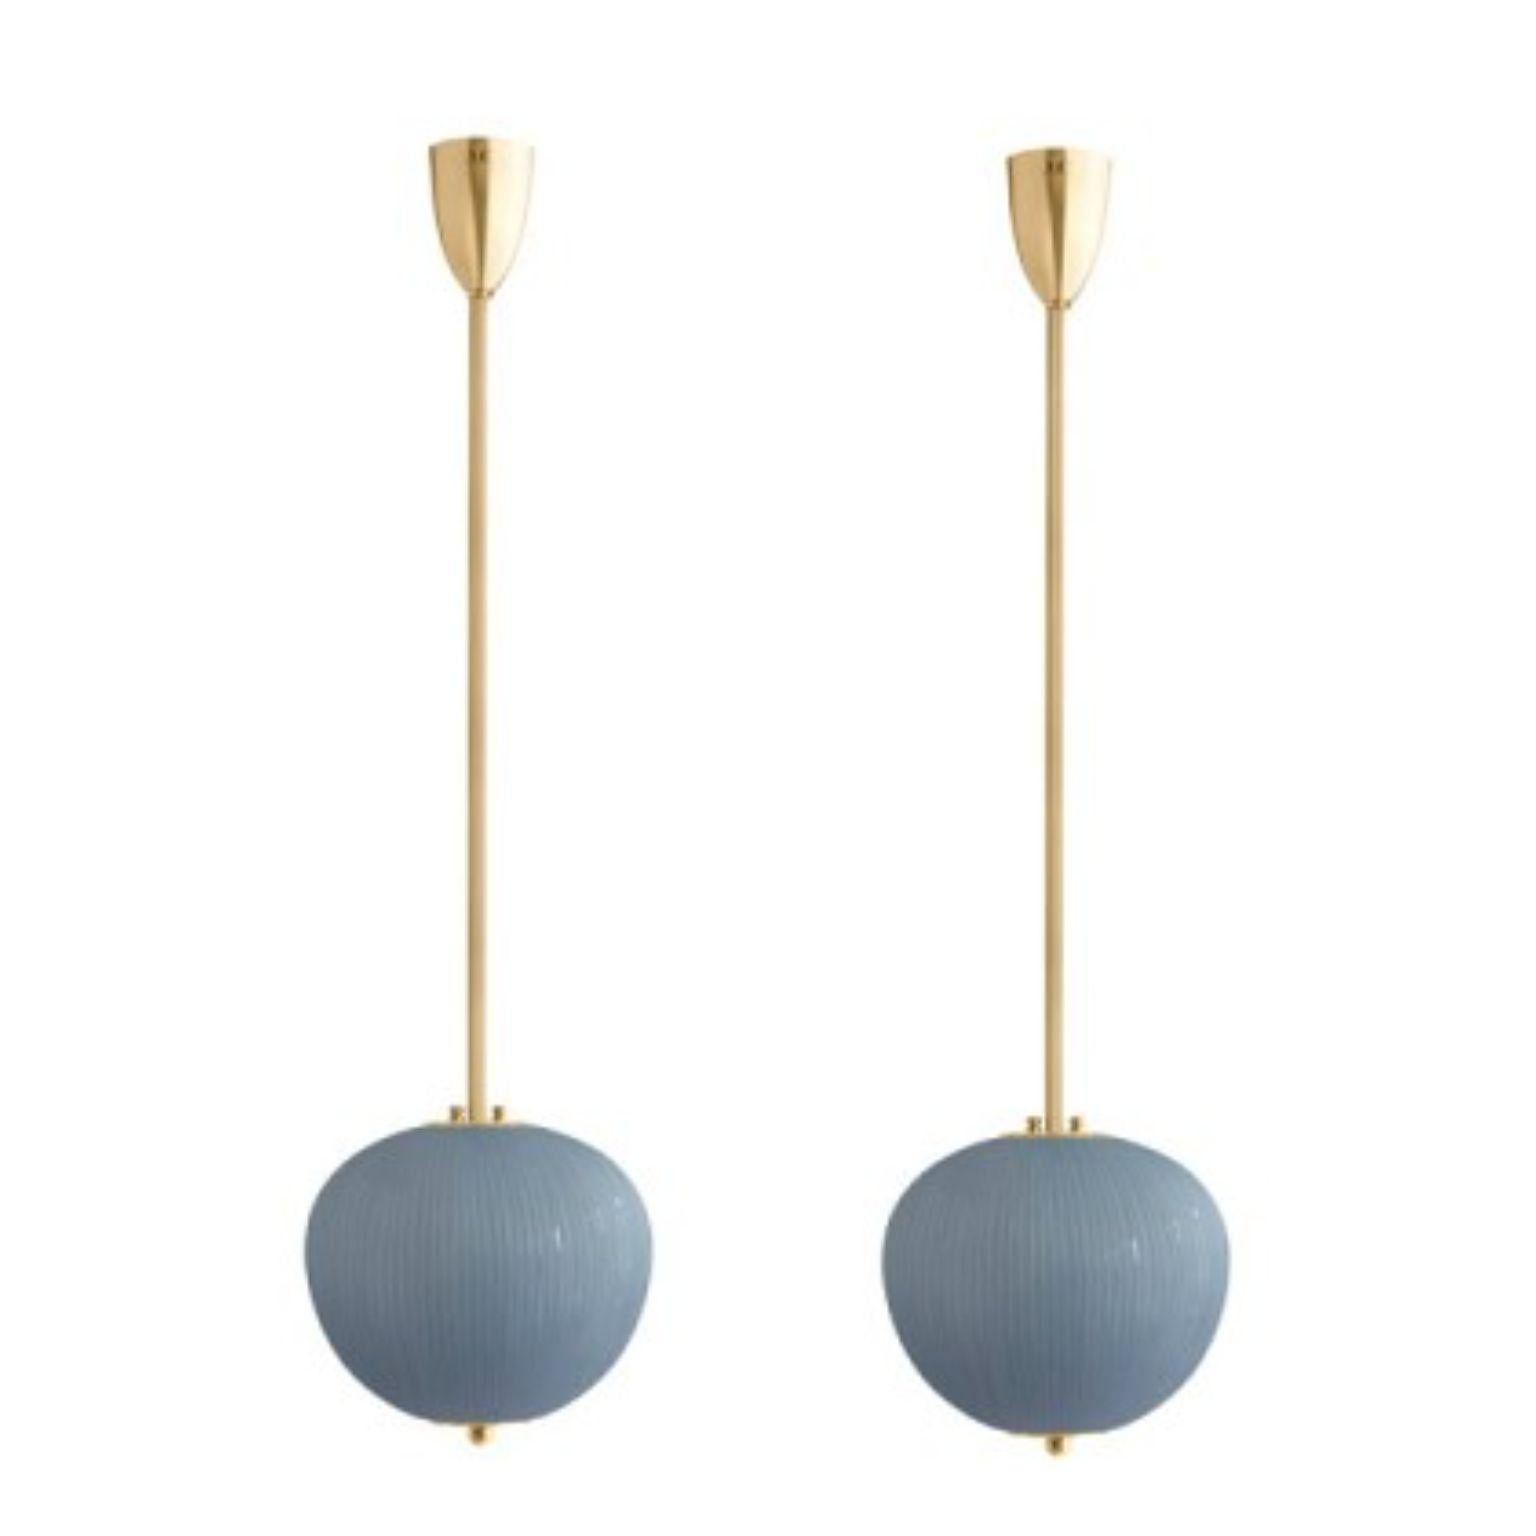 Pendant China 03 by Magic Circus Editions
Dimensions: H 90 x W 26.2 x D 26.2 cm, also available in H 110, 130, 150, 175, 190
Materials: Brass, mouth blown glass sculpted with a diamond saw
Colour: Opal grey

Available finishes: Brass,